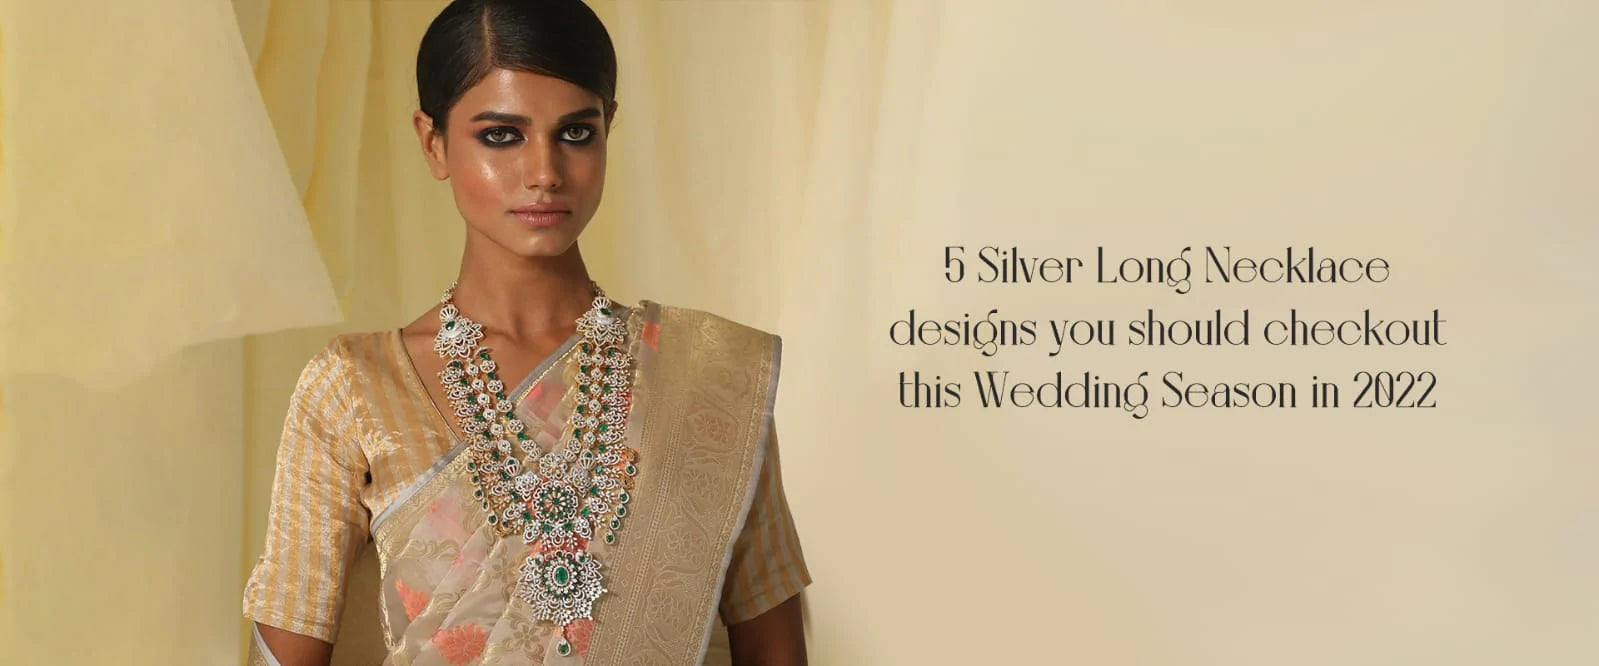 5 Silver Long Necklace Designs You Should Check out This Wedding Season in 2022